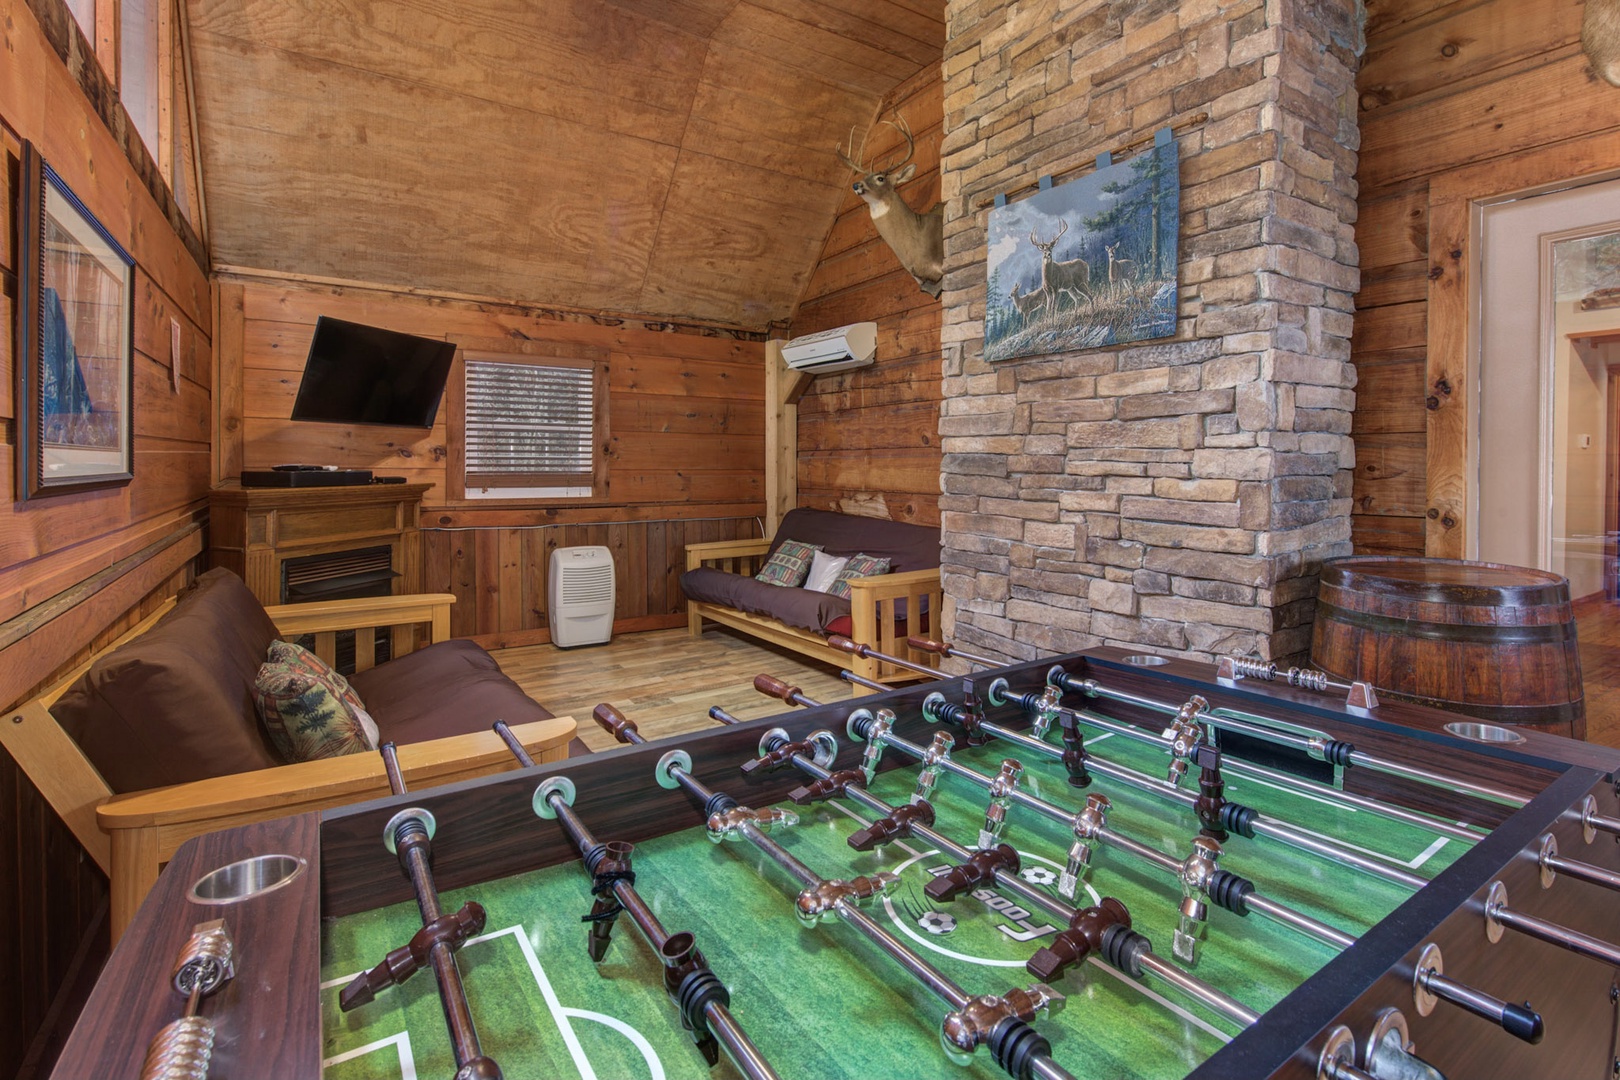 Ignite your competitive spirit with a game of foosball in the game room!